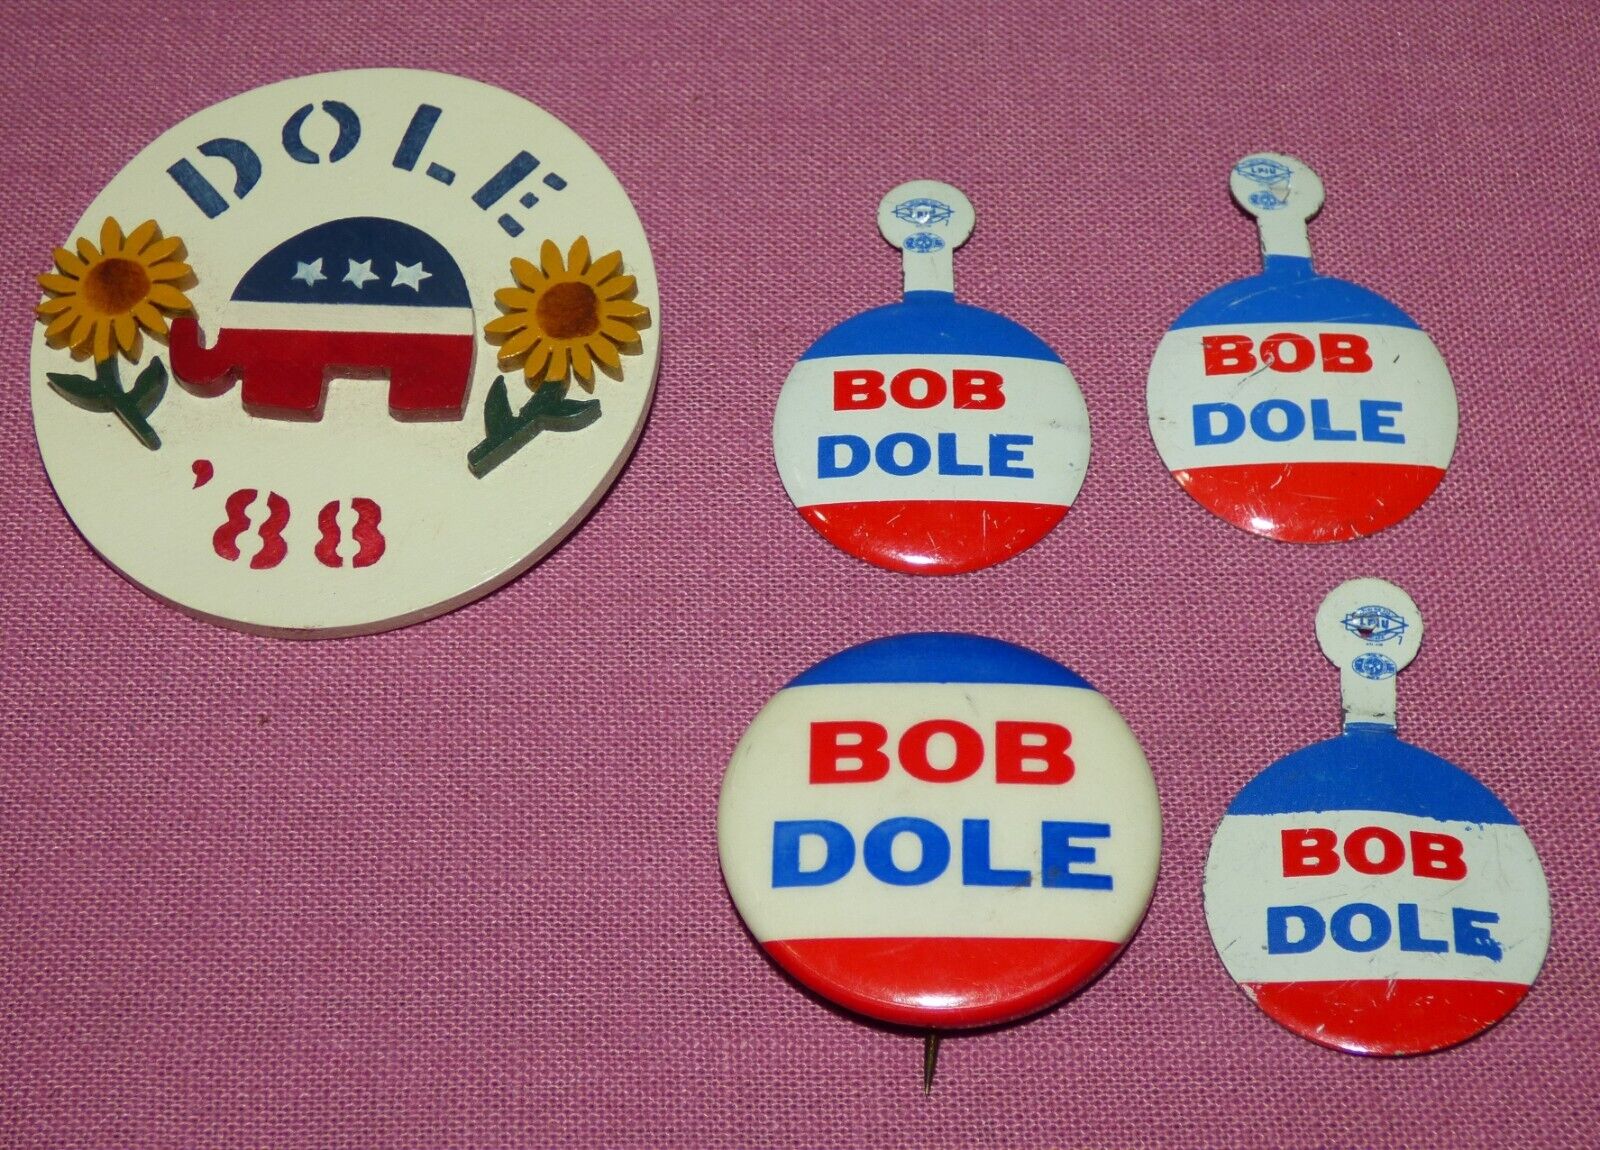 Lot of 5 Bob Dole Campaign Buttons, Lapel Pins Limited Edition